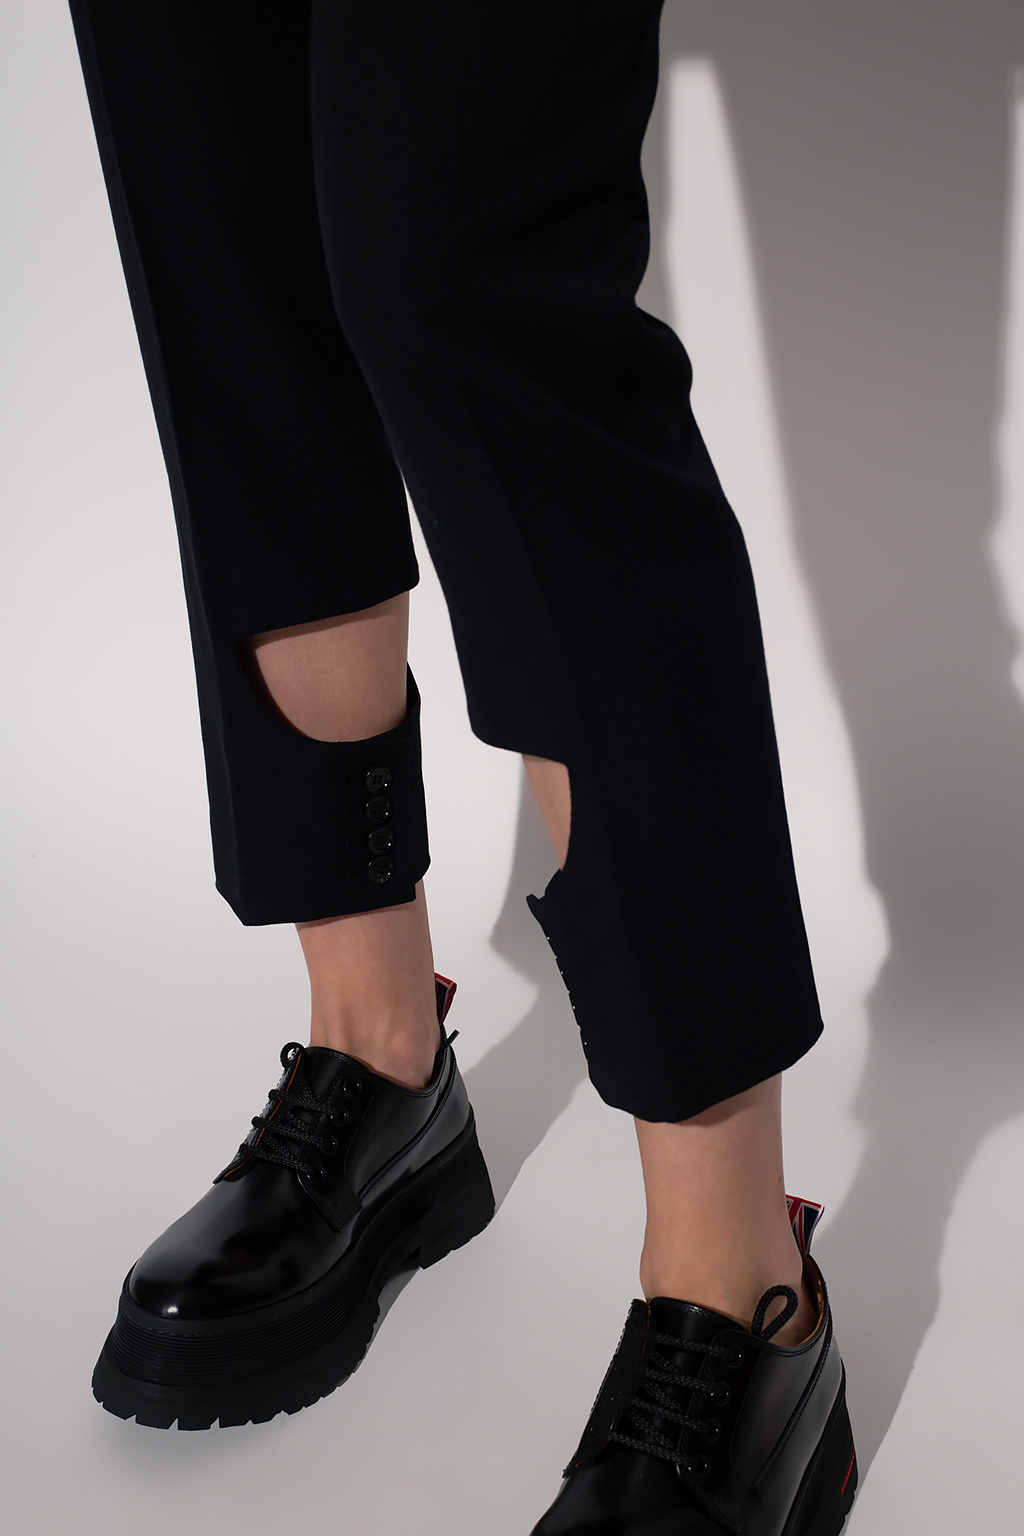 Burberry Pleat-front Gar trousers